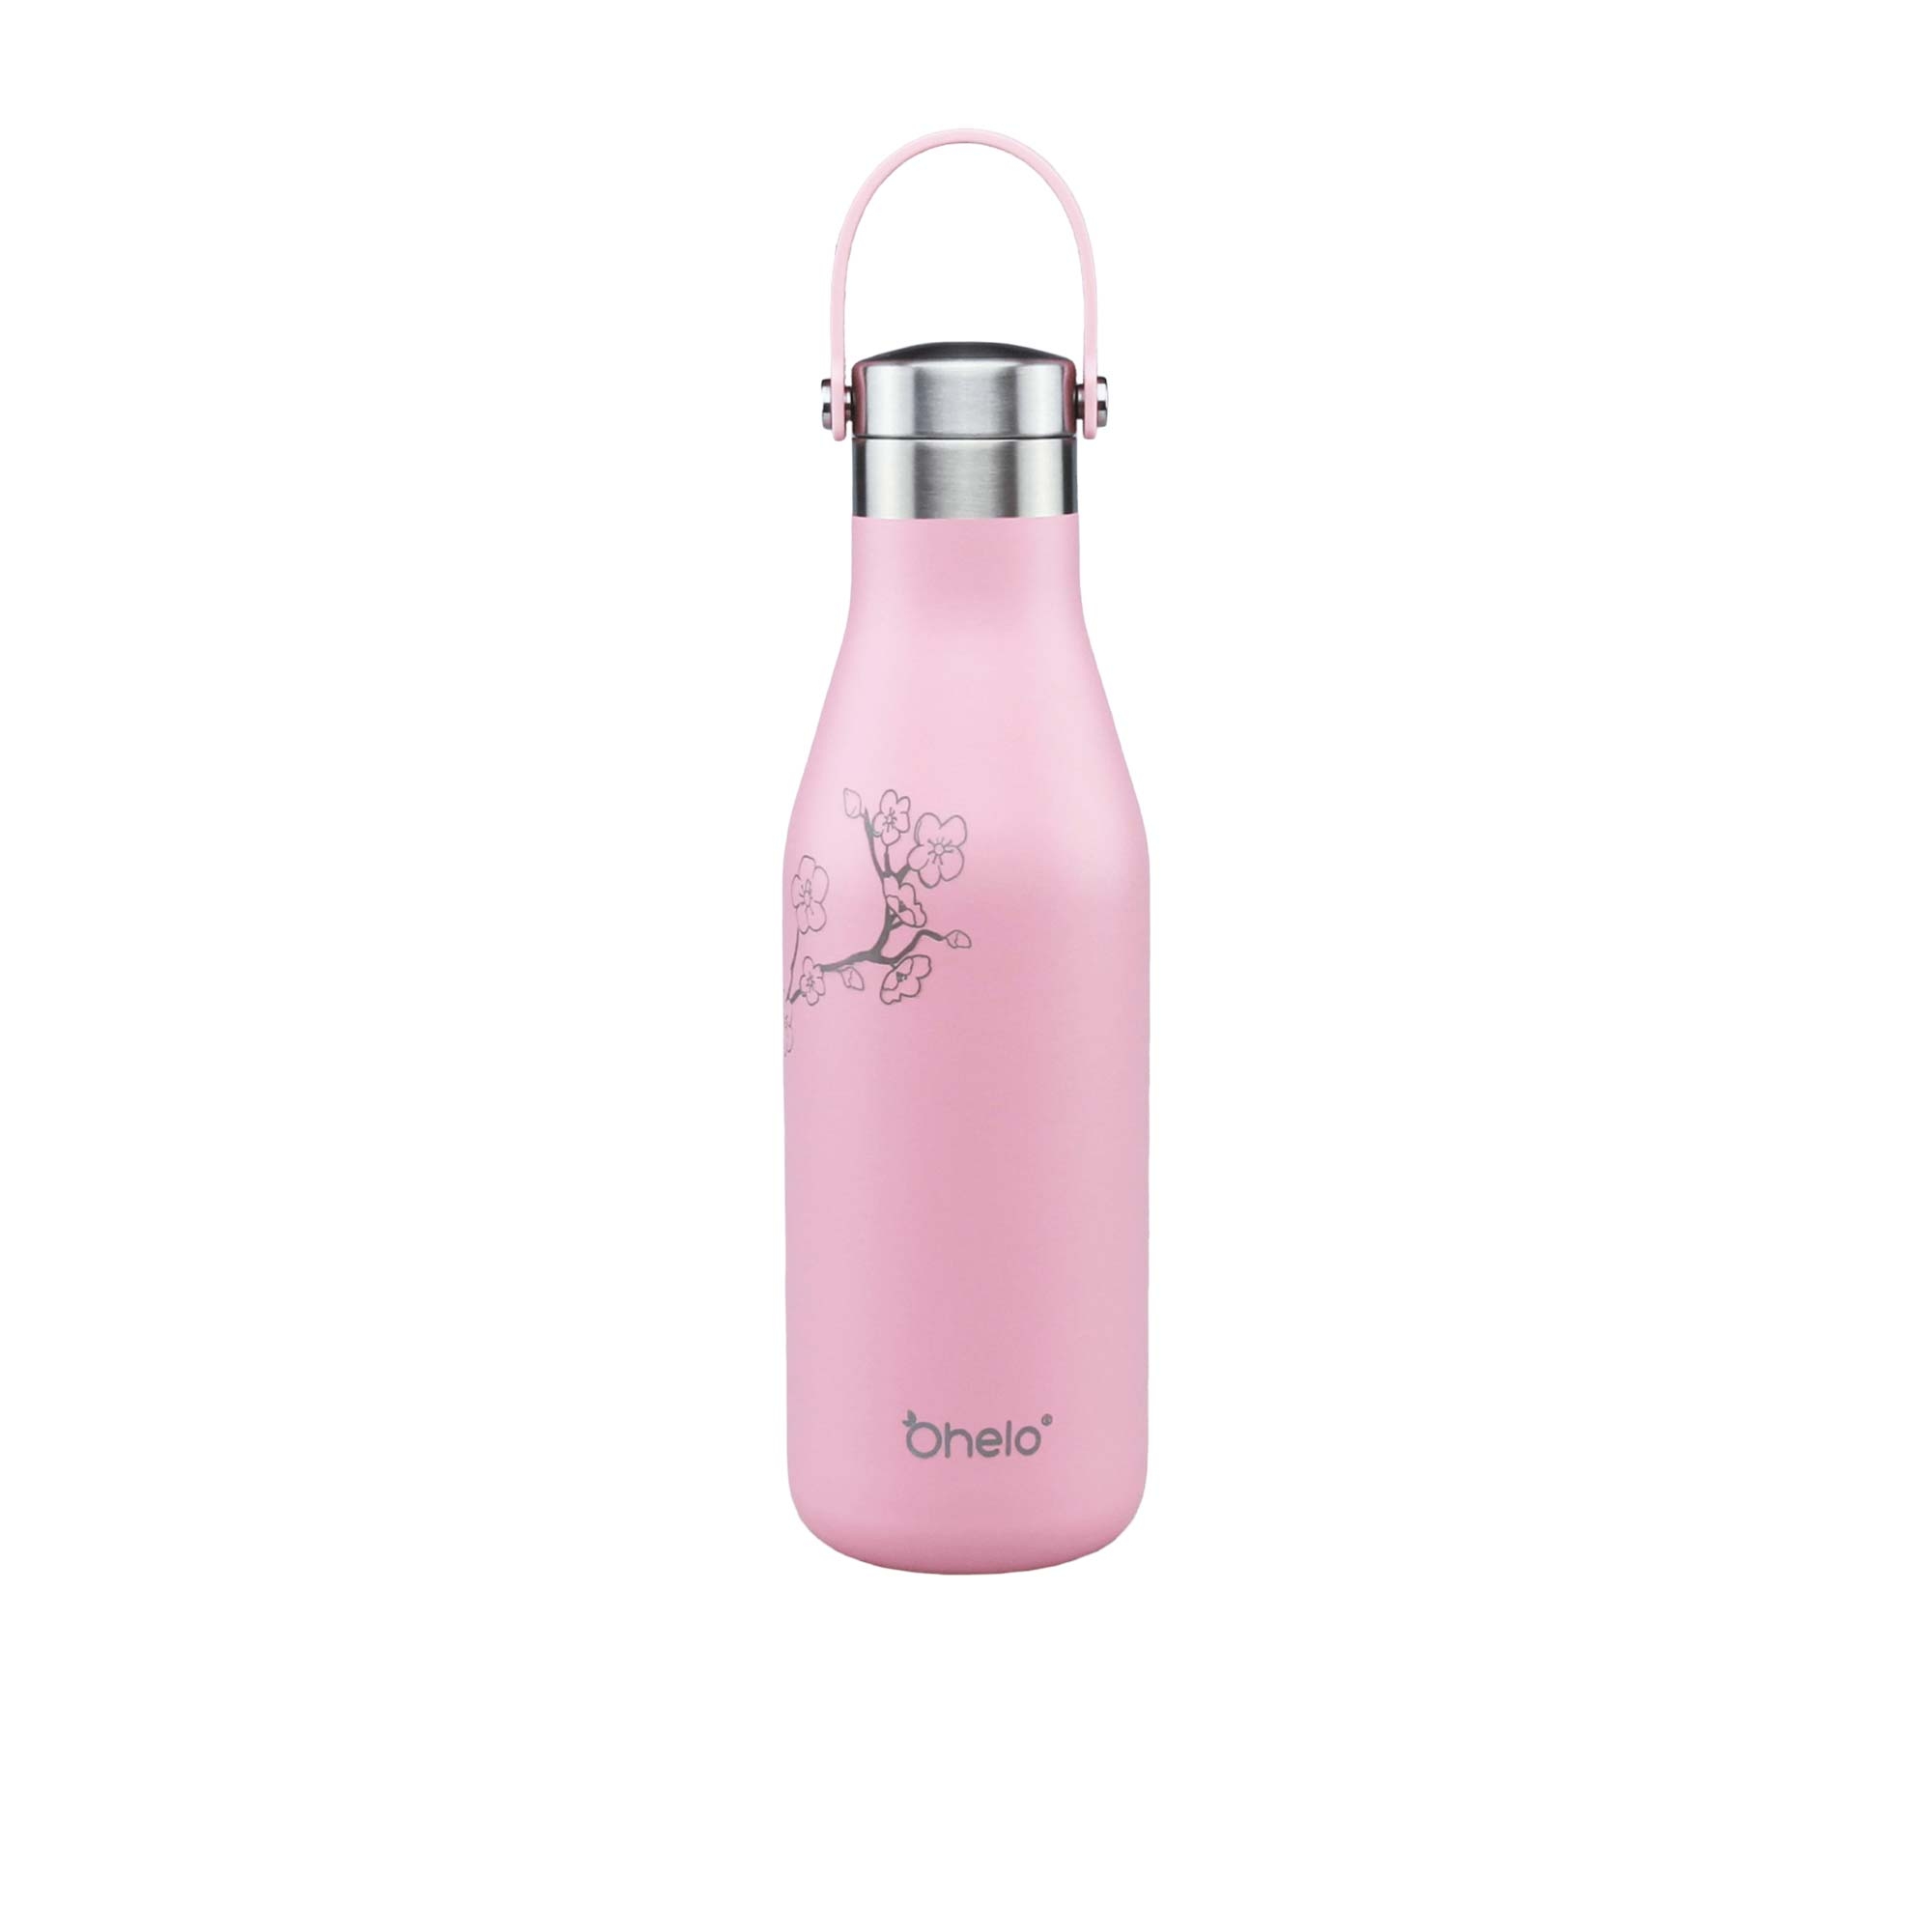 Ohelo Insulated Drink Bottle 500ml Pink Image 1